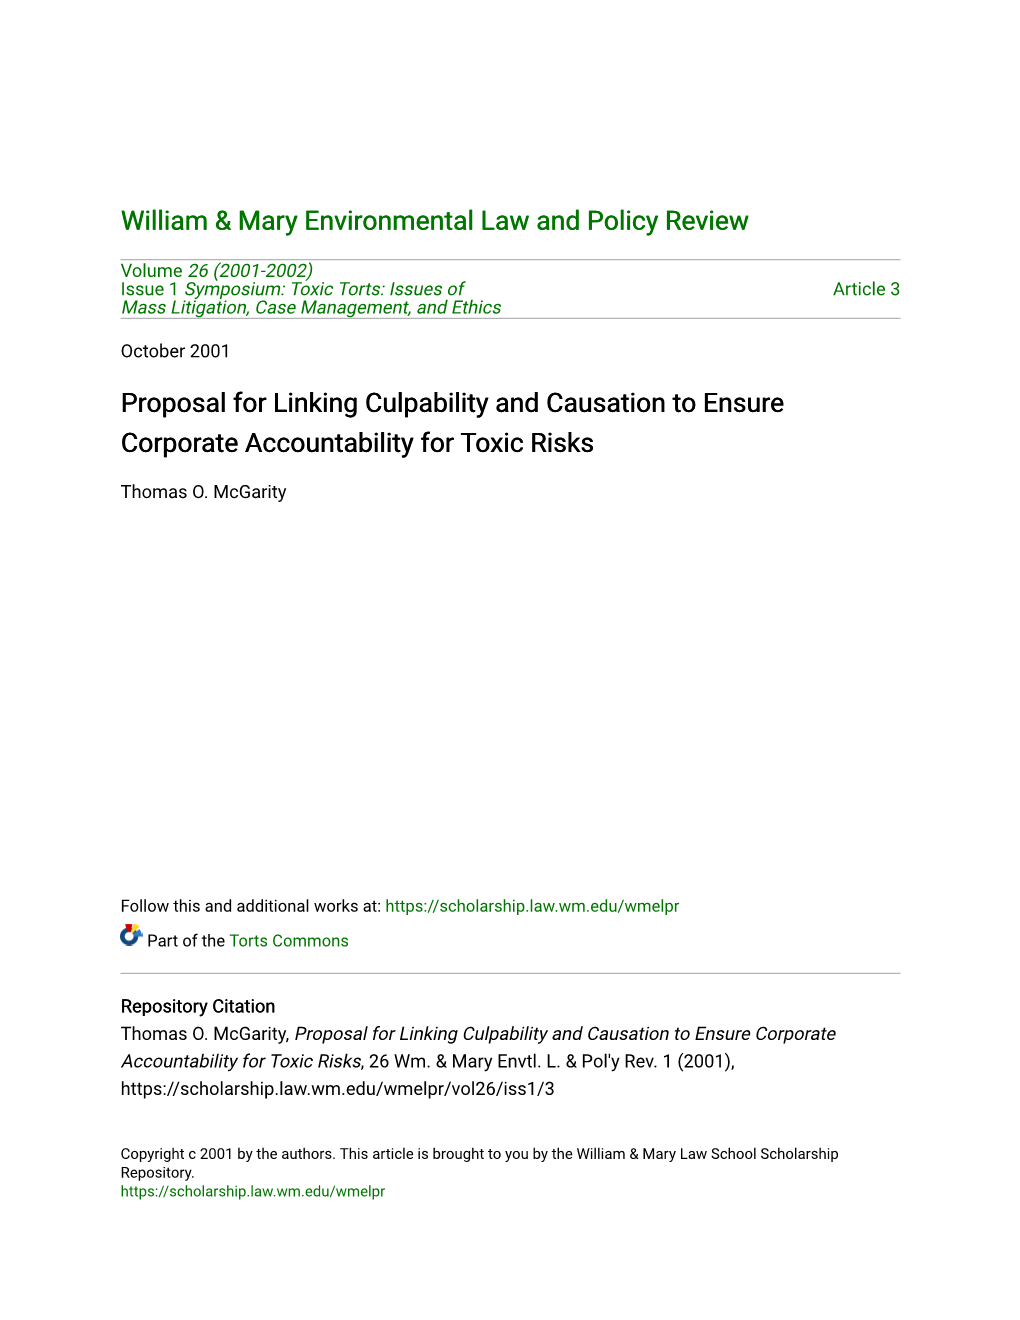 Proposal for Linking Culpability and Causation to Ensure Corporate Accountability for Toxic Risks